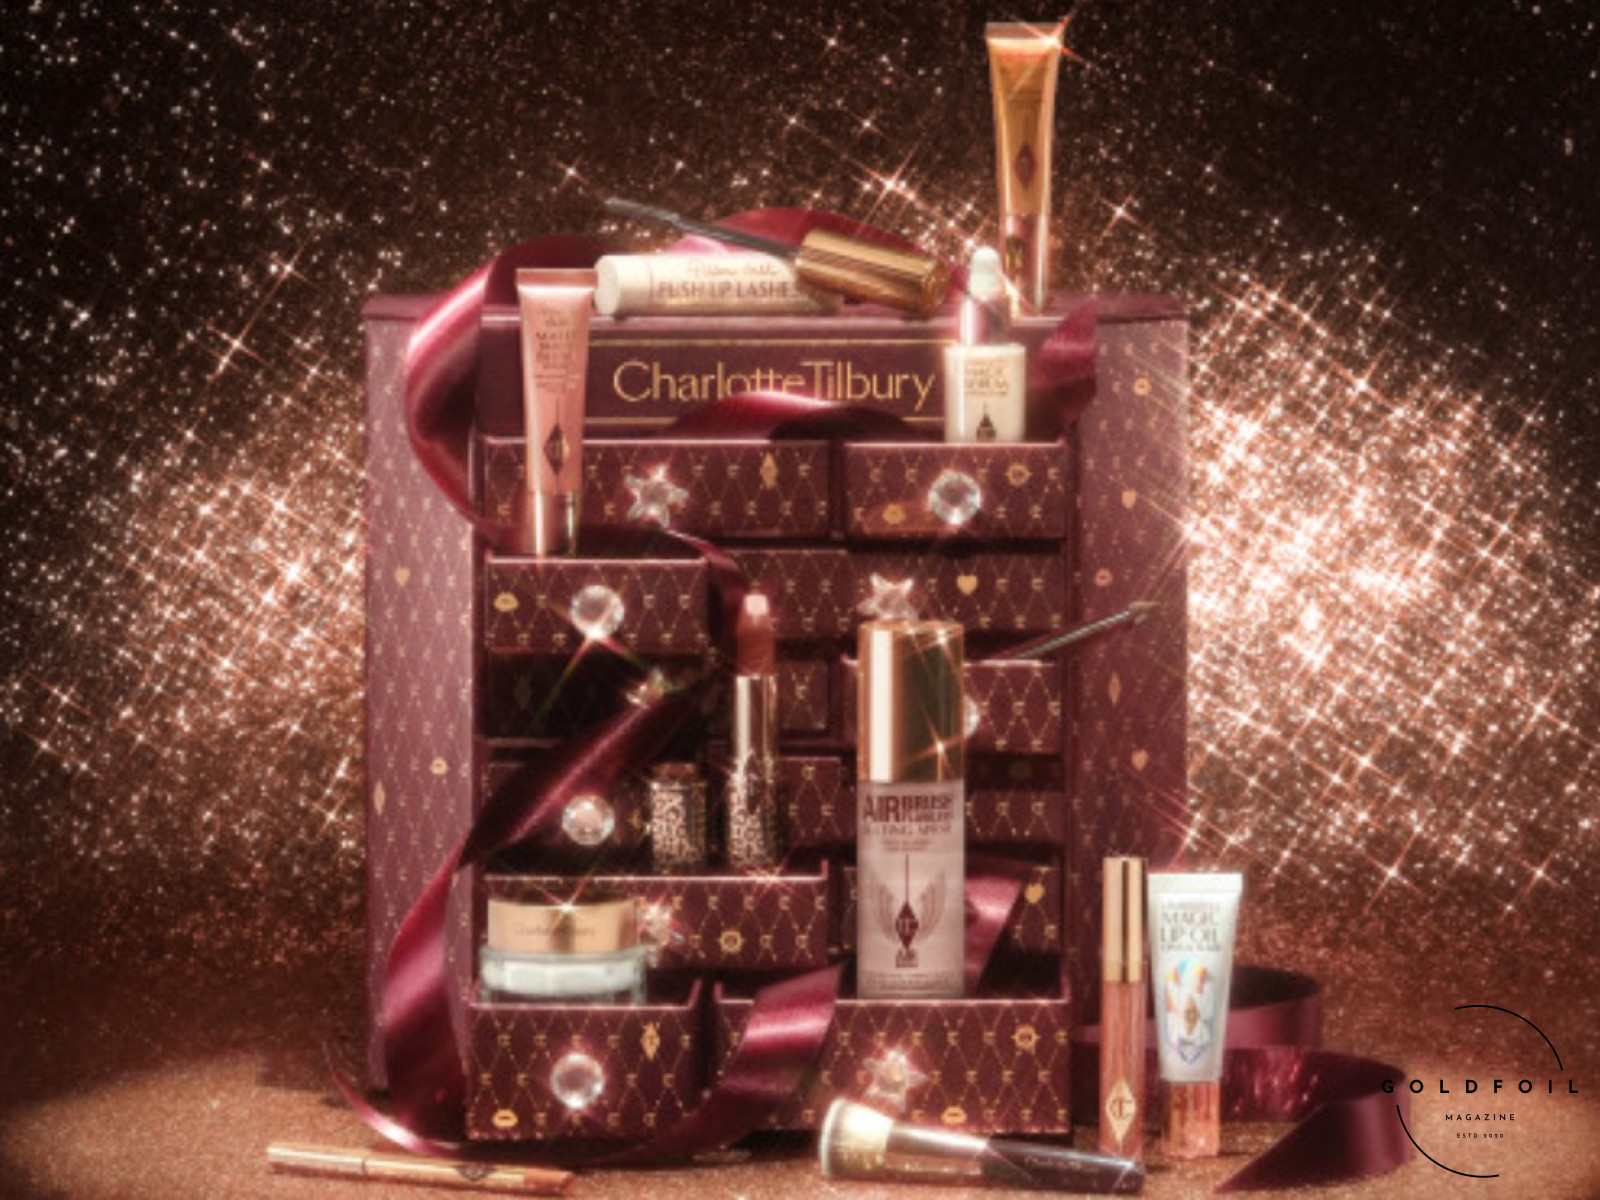 Charlotte Tilbury advent calendar is one of the best christmas gifts on the luxurious end with some of the most iconic makeup and skincare products from the brand